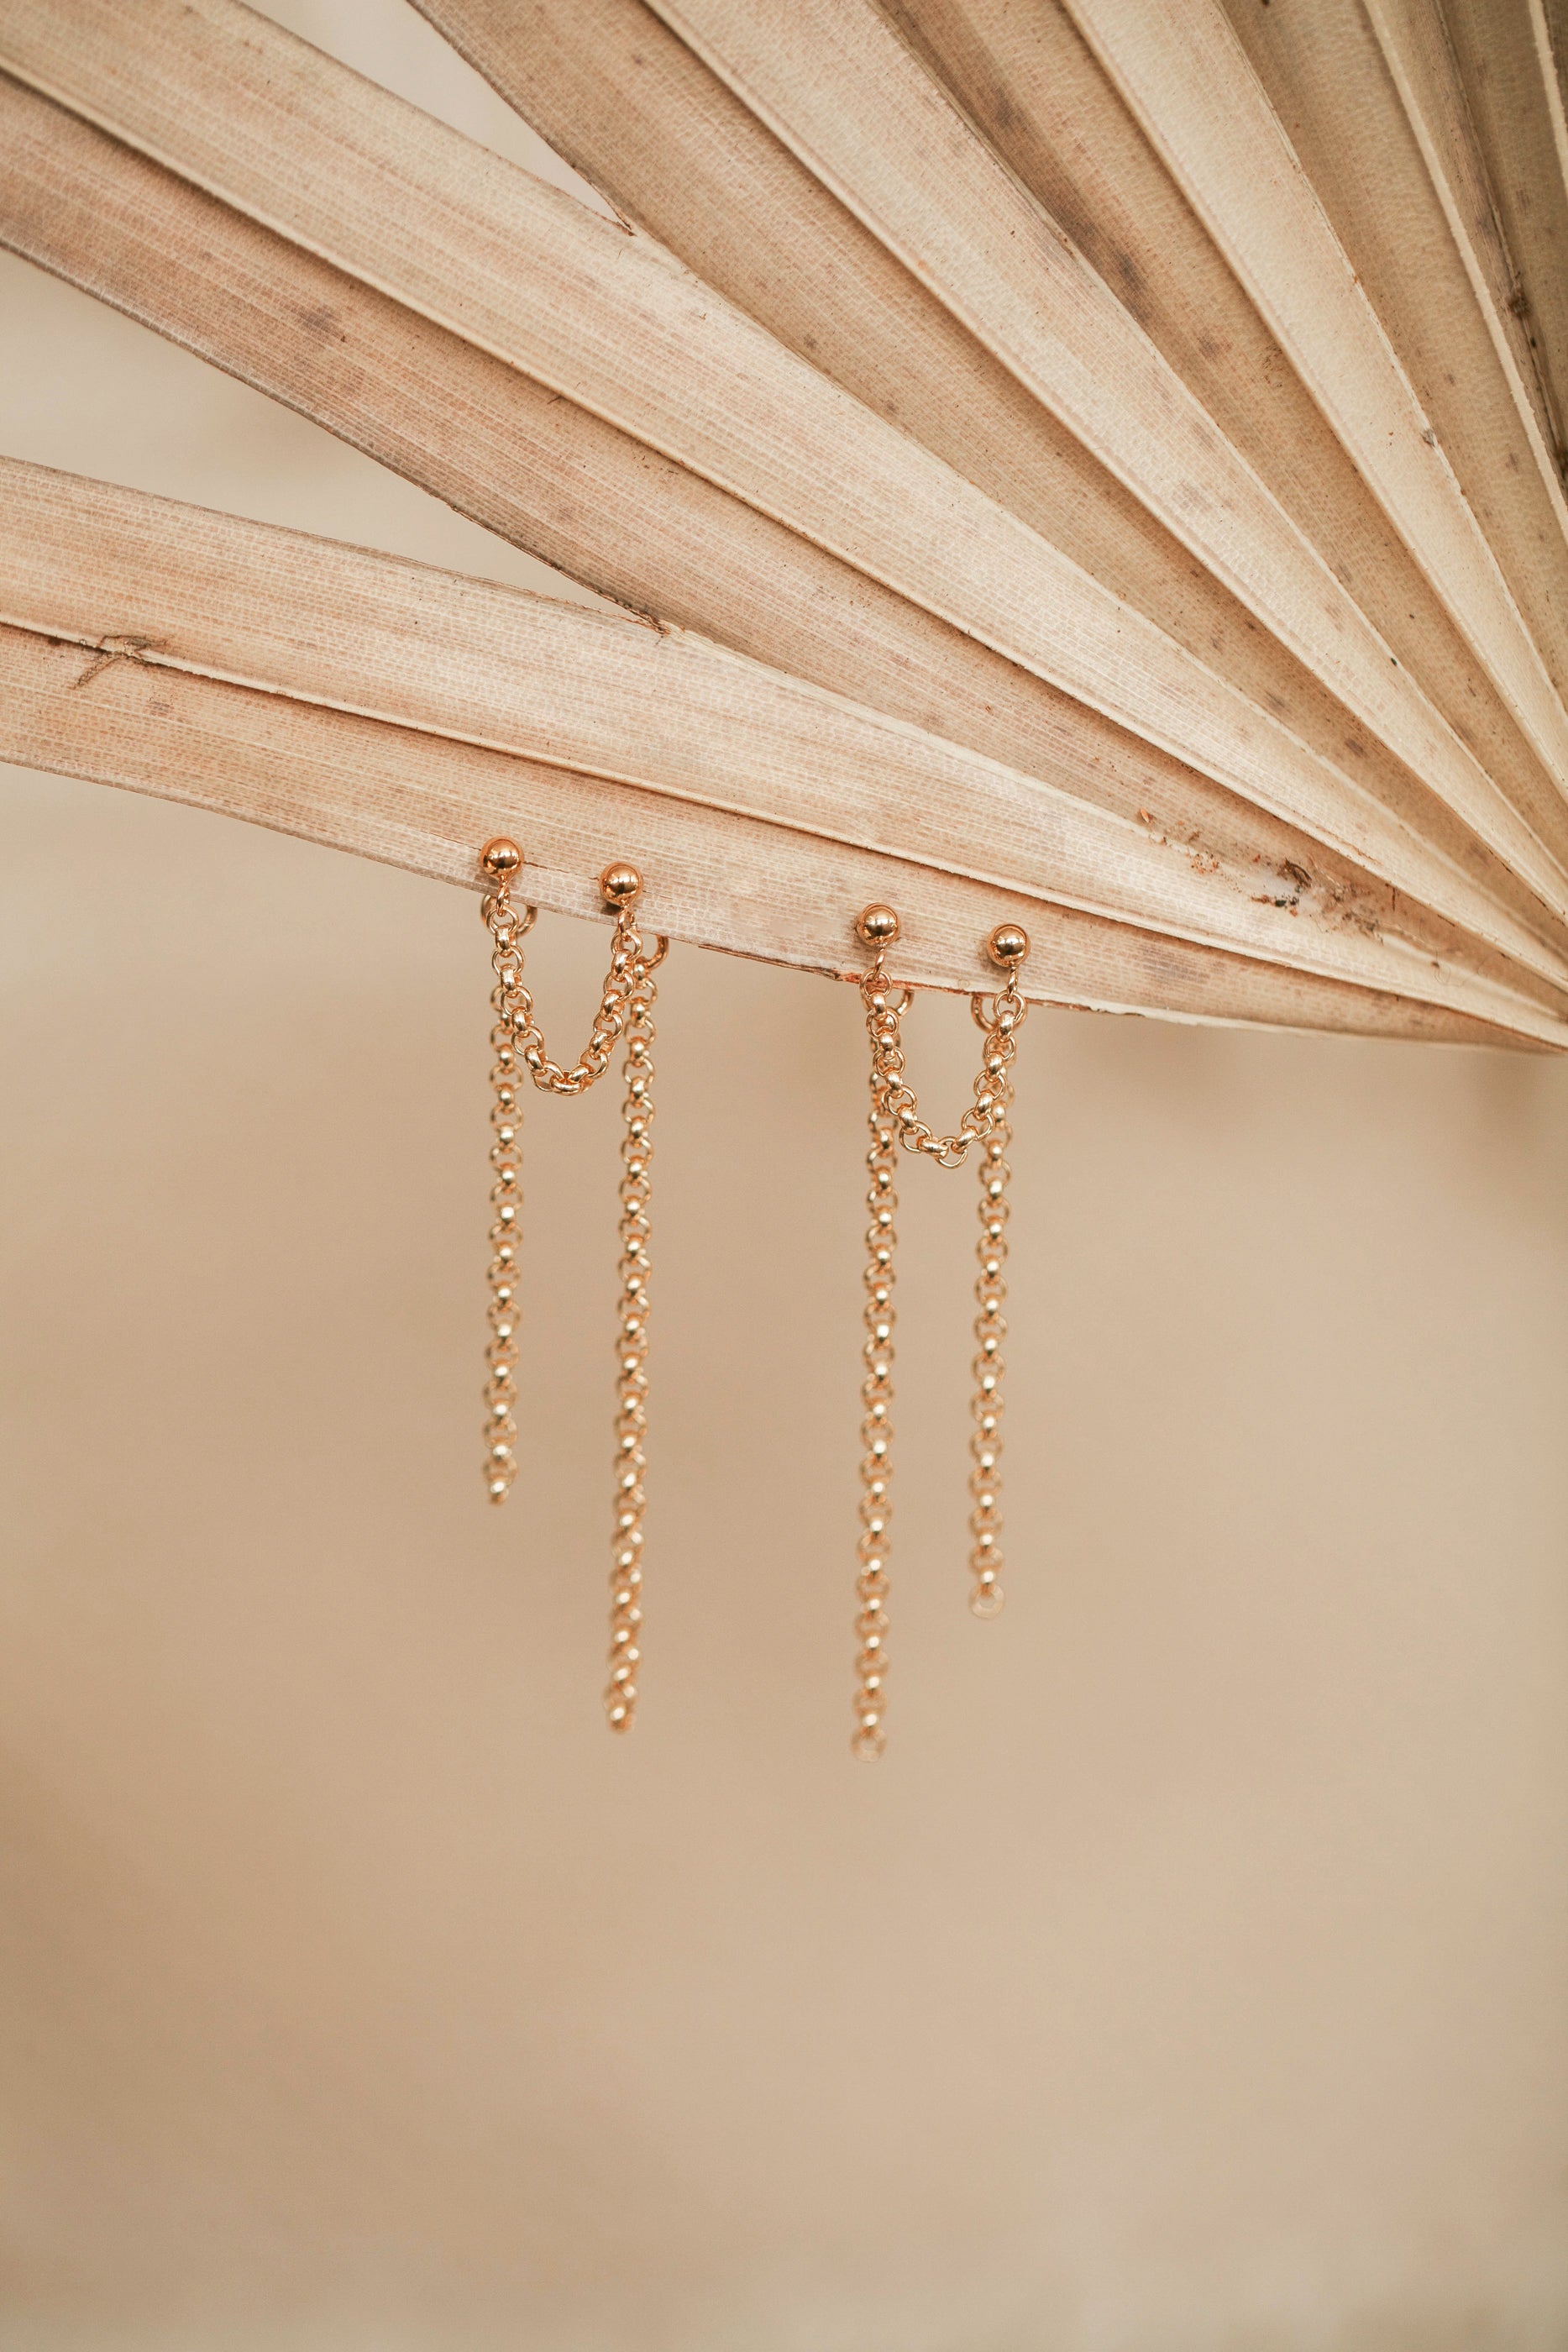 Double Up Posts, 14kt Gold Fill / Smaller - 6mm by Hello Adorn